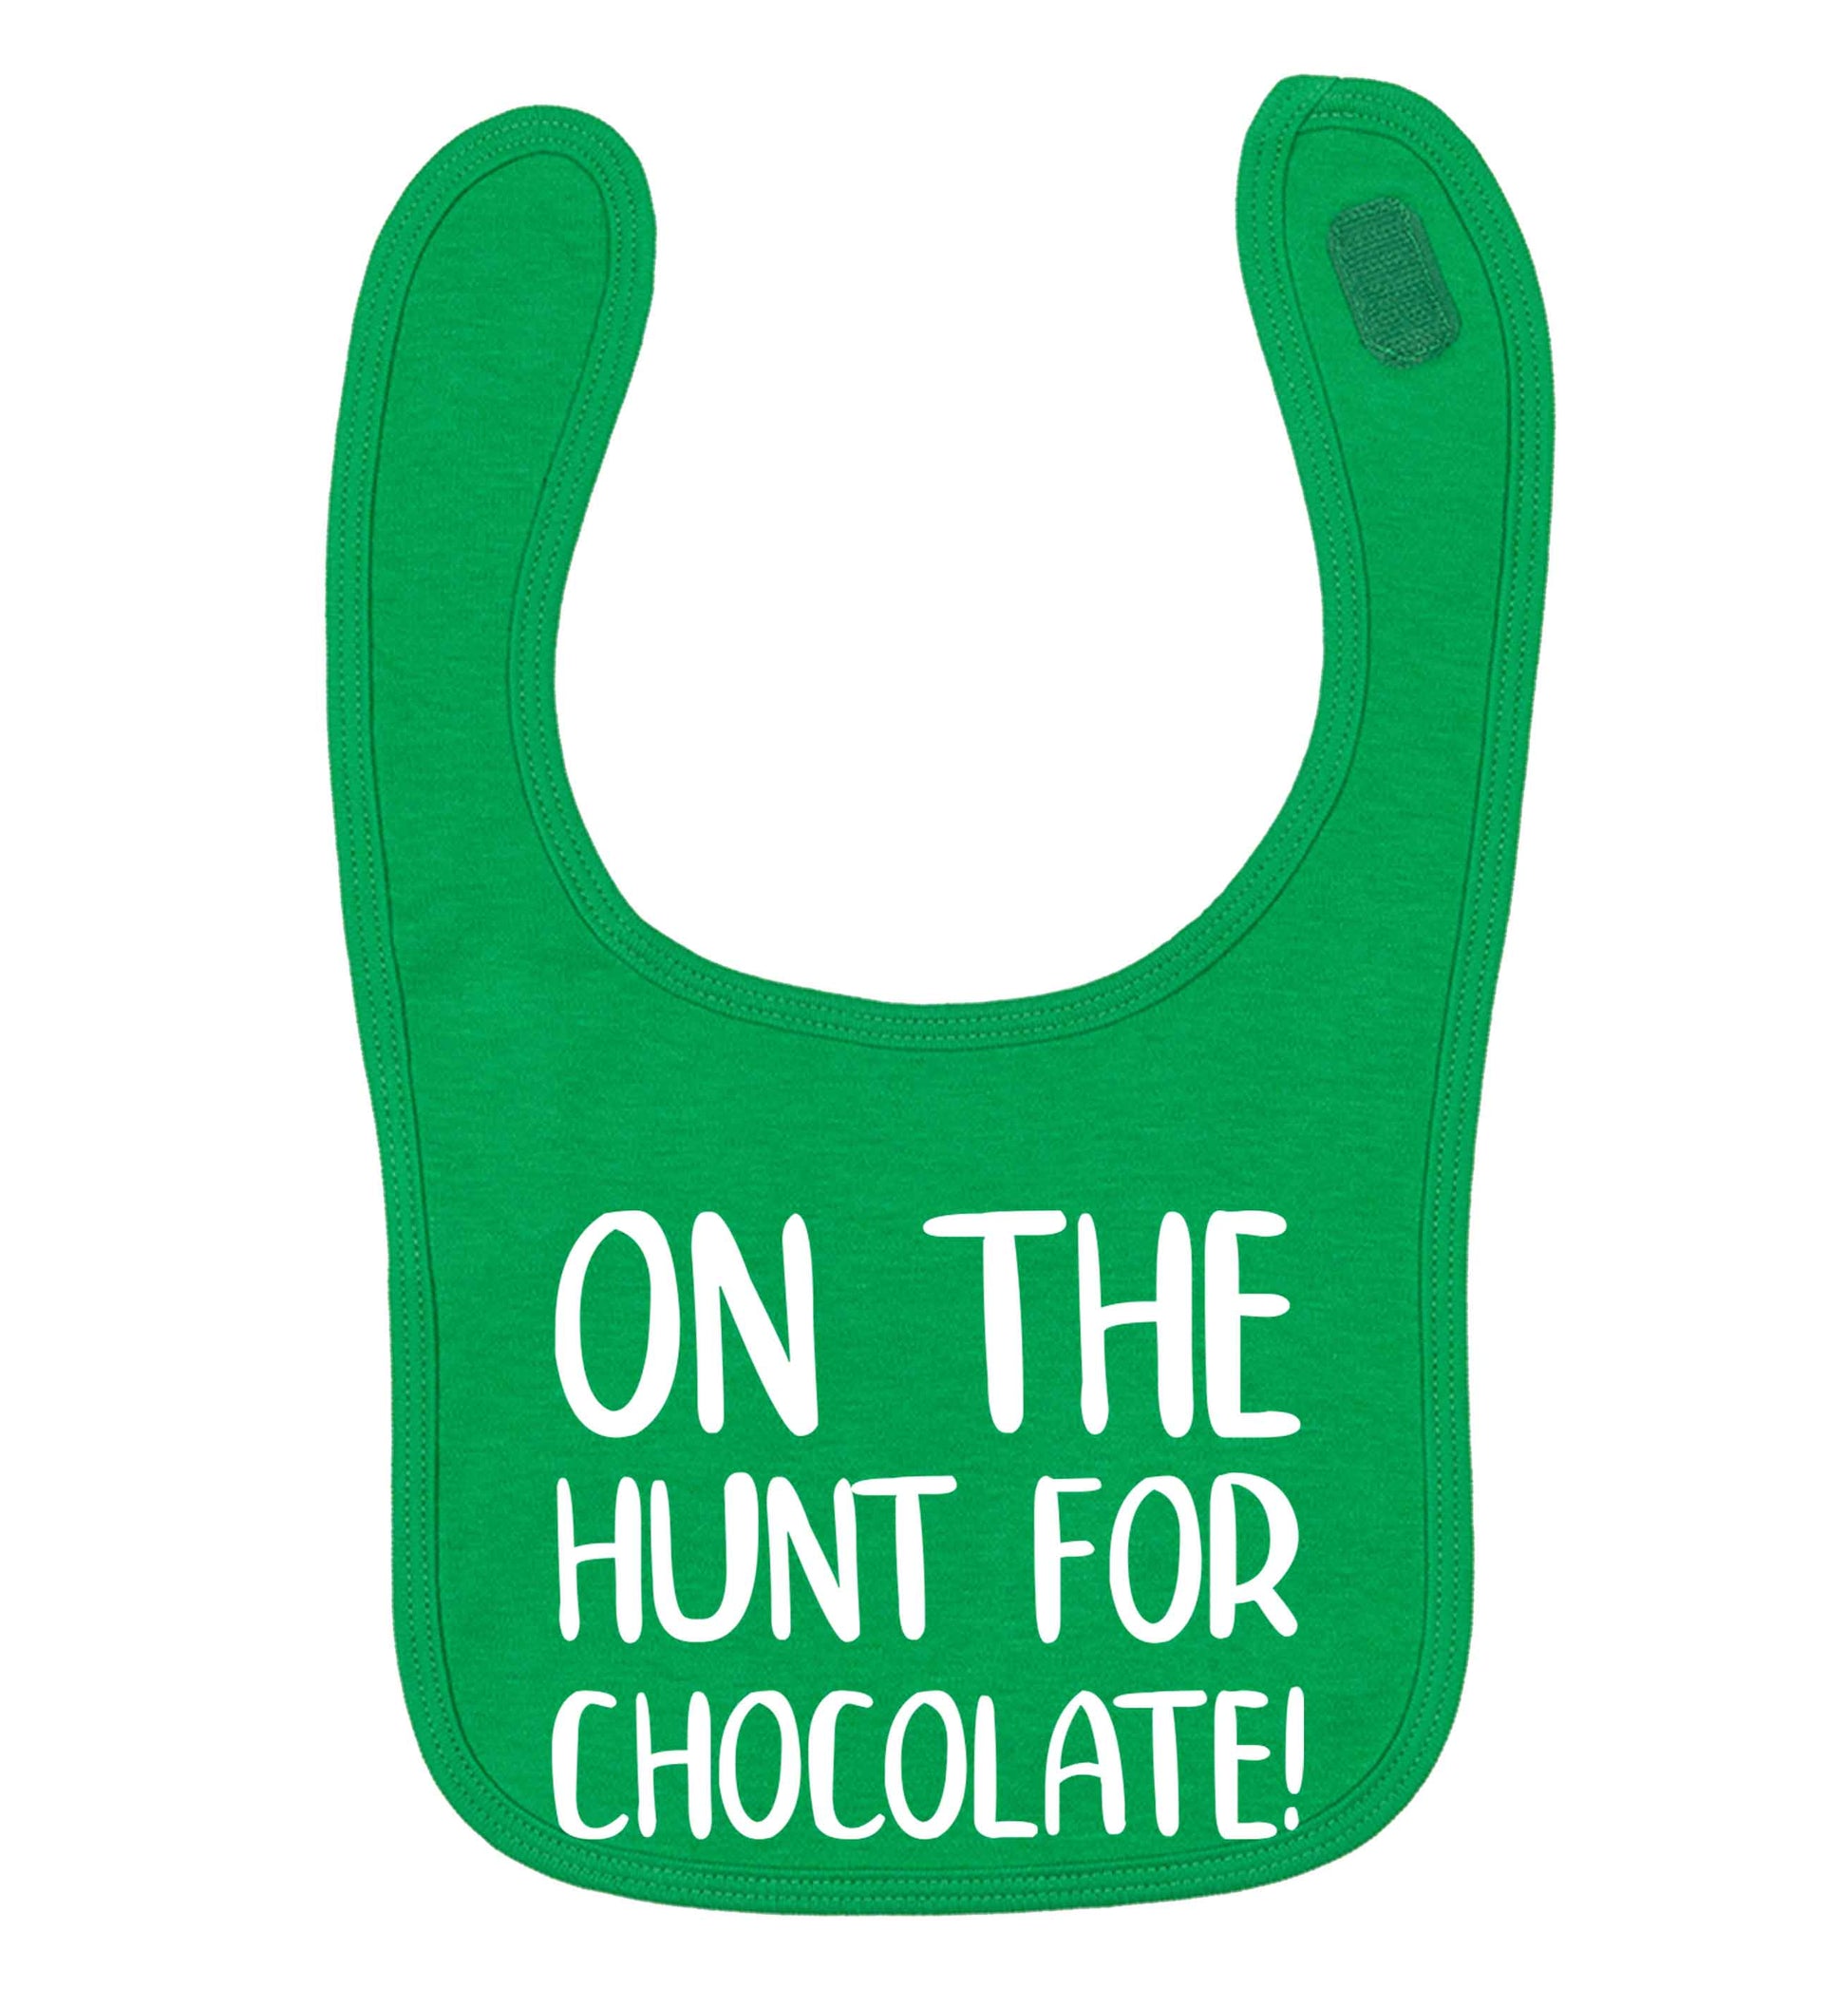 On the hunt for chocolate! green baby bib